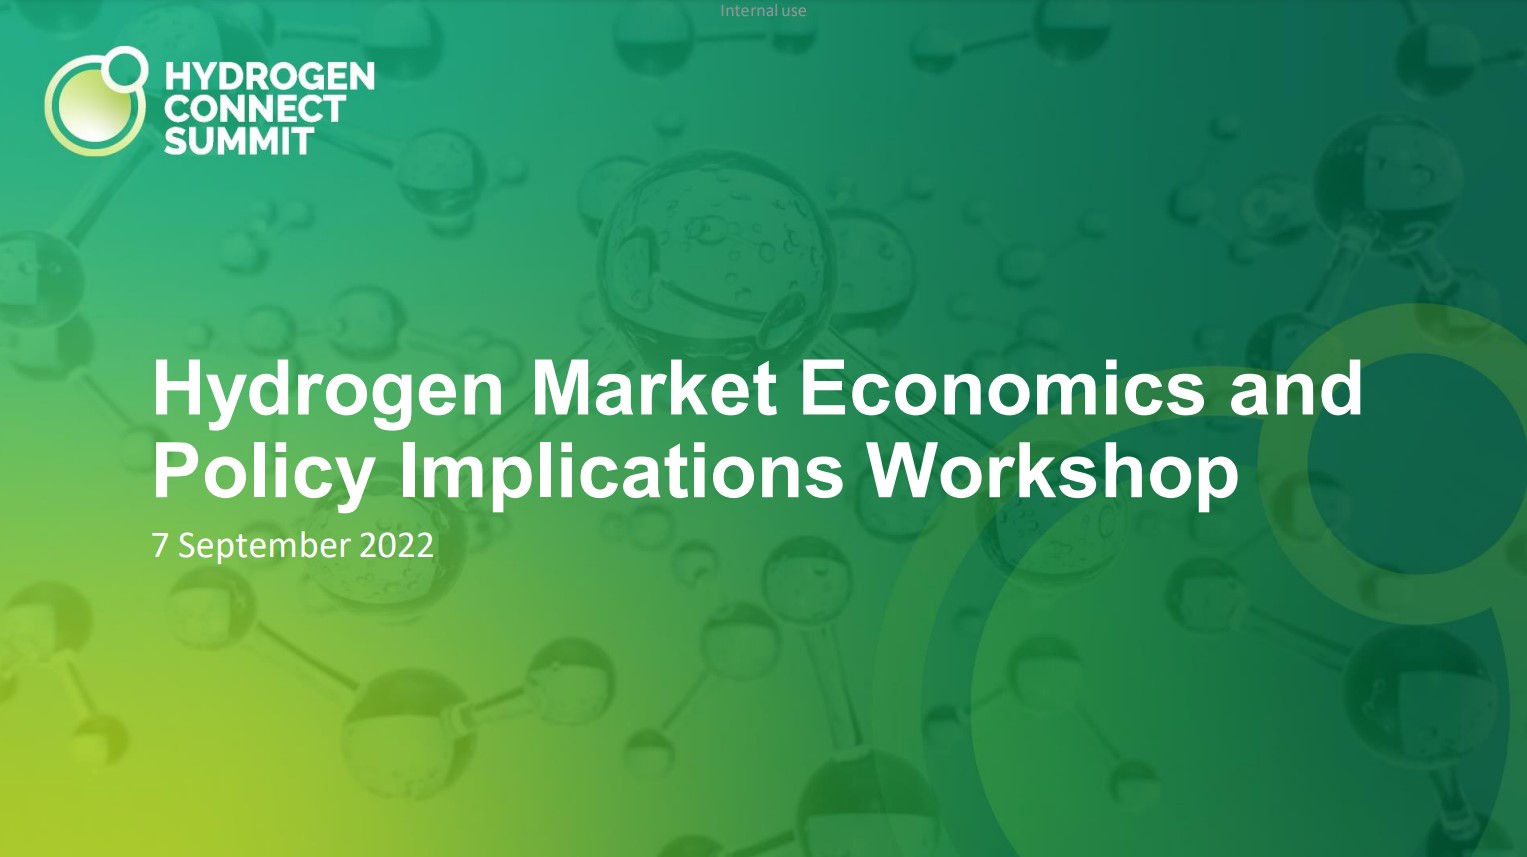 You are currently viewing Hydrogen Connect Summit 2022 – Hydrogen Market Economics and Policy Implications